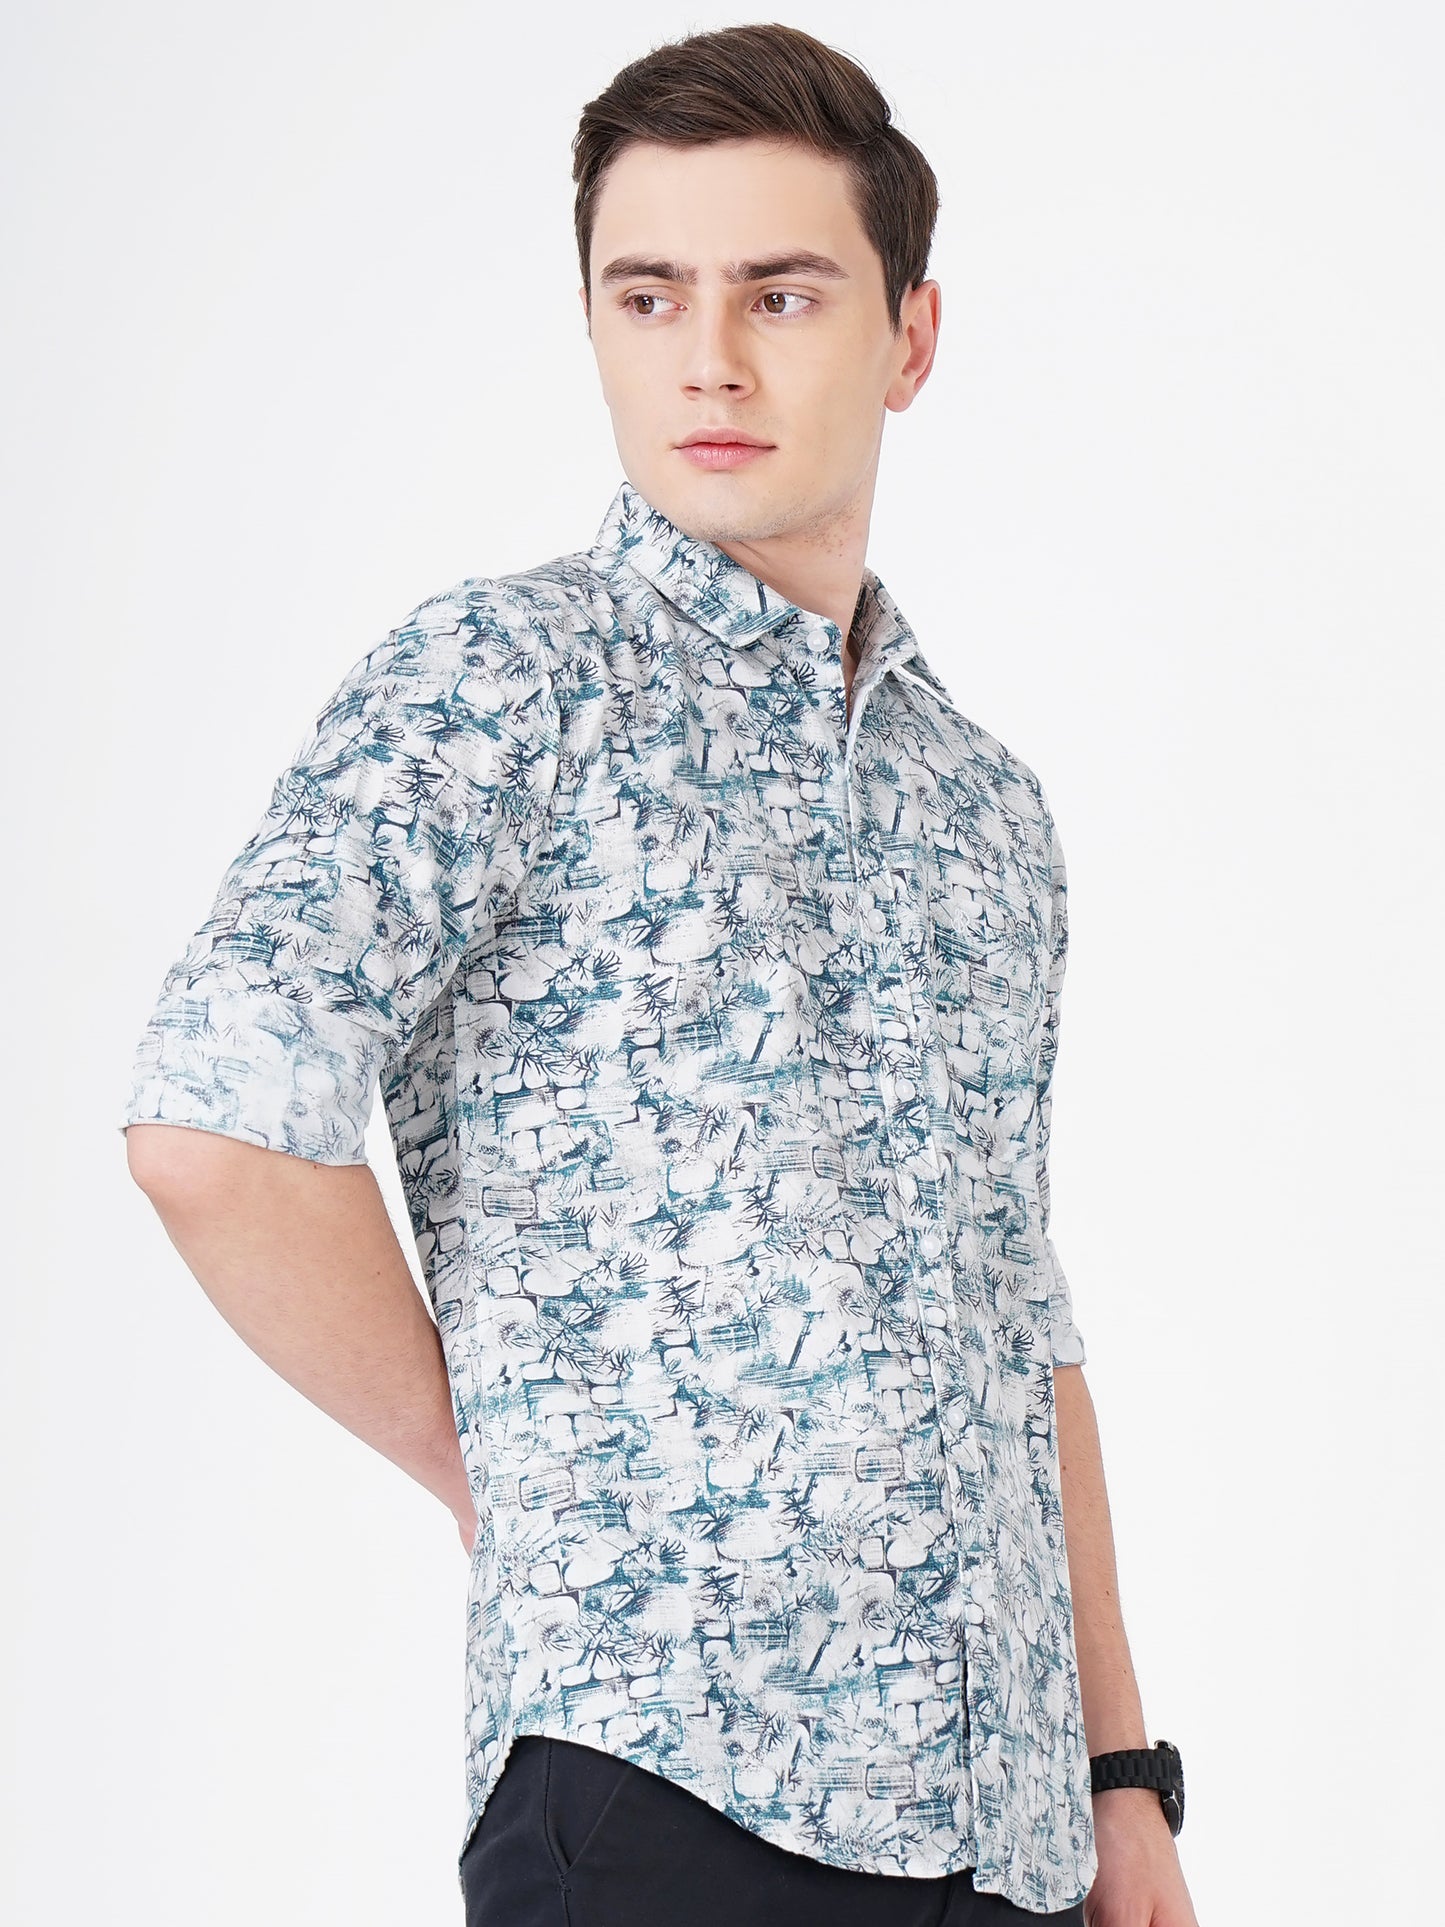 Rock Blue All Over Printed Shirt for Men 